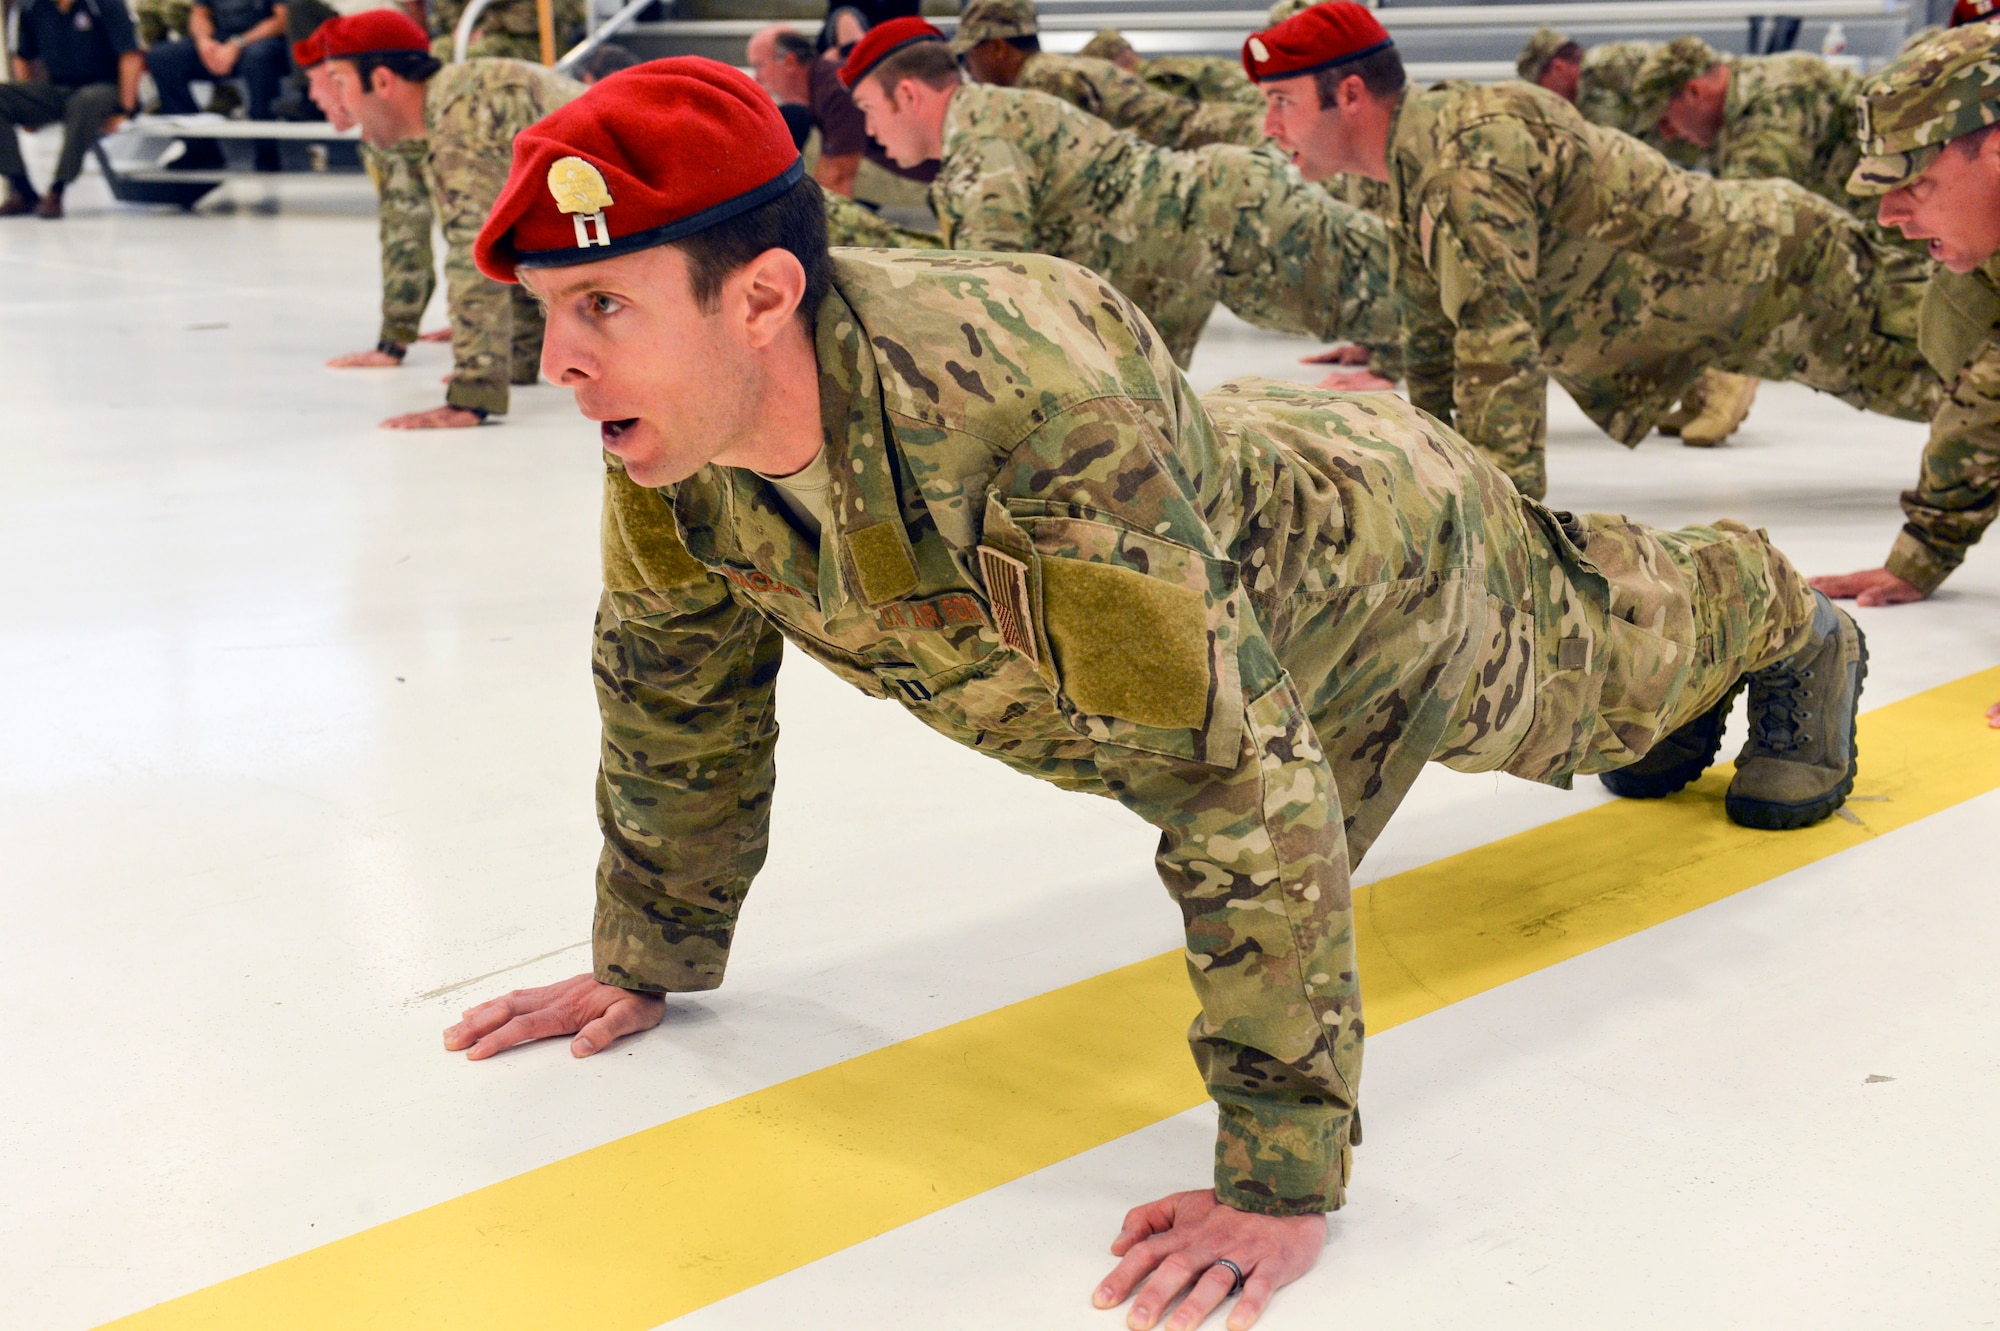 Capt. Garrett Ianacone, 22nd Special Tactics Squadron director of operations, performs memorial push-ups with his Airmen during the change of command ceremony, June 3, 2014, at Joint Base Lewis-McChord, Wash. Col. Thad Allen, outgoing 22nd STS commander, gave his final order and led the Airmen in the push-ups before he relinquished his command of the squadron. (U.S. Air Force photo/Staff Sgt. Russ Jackson)